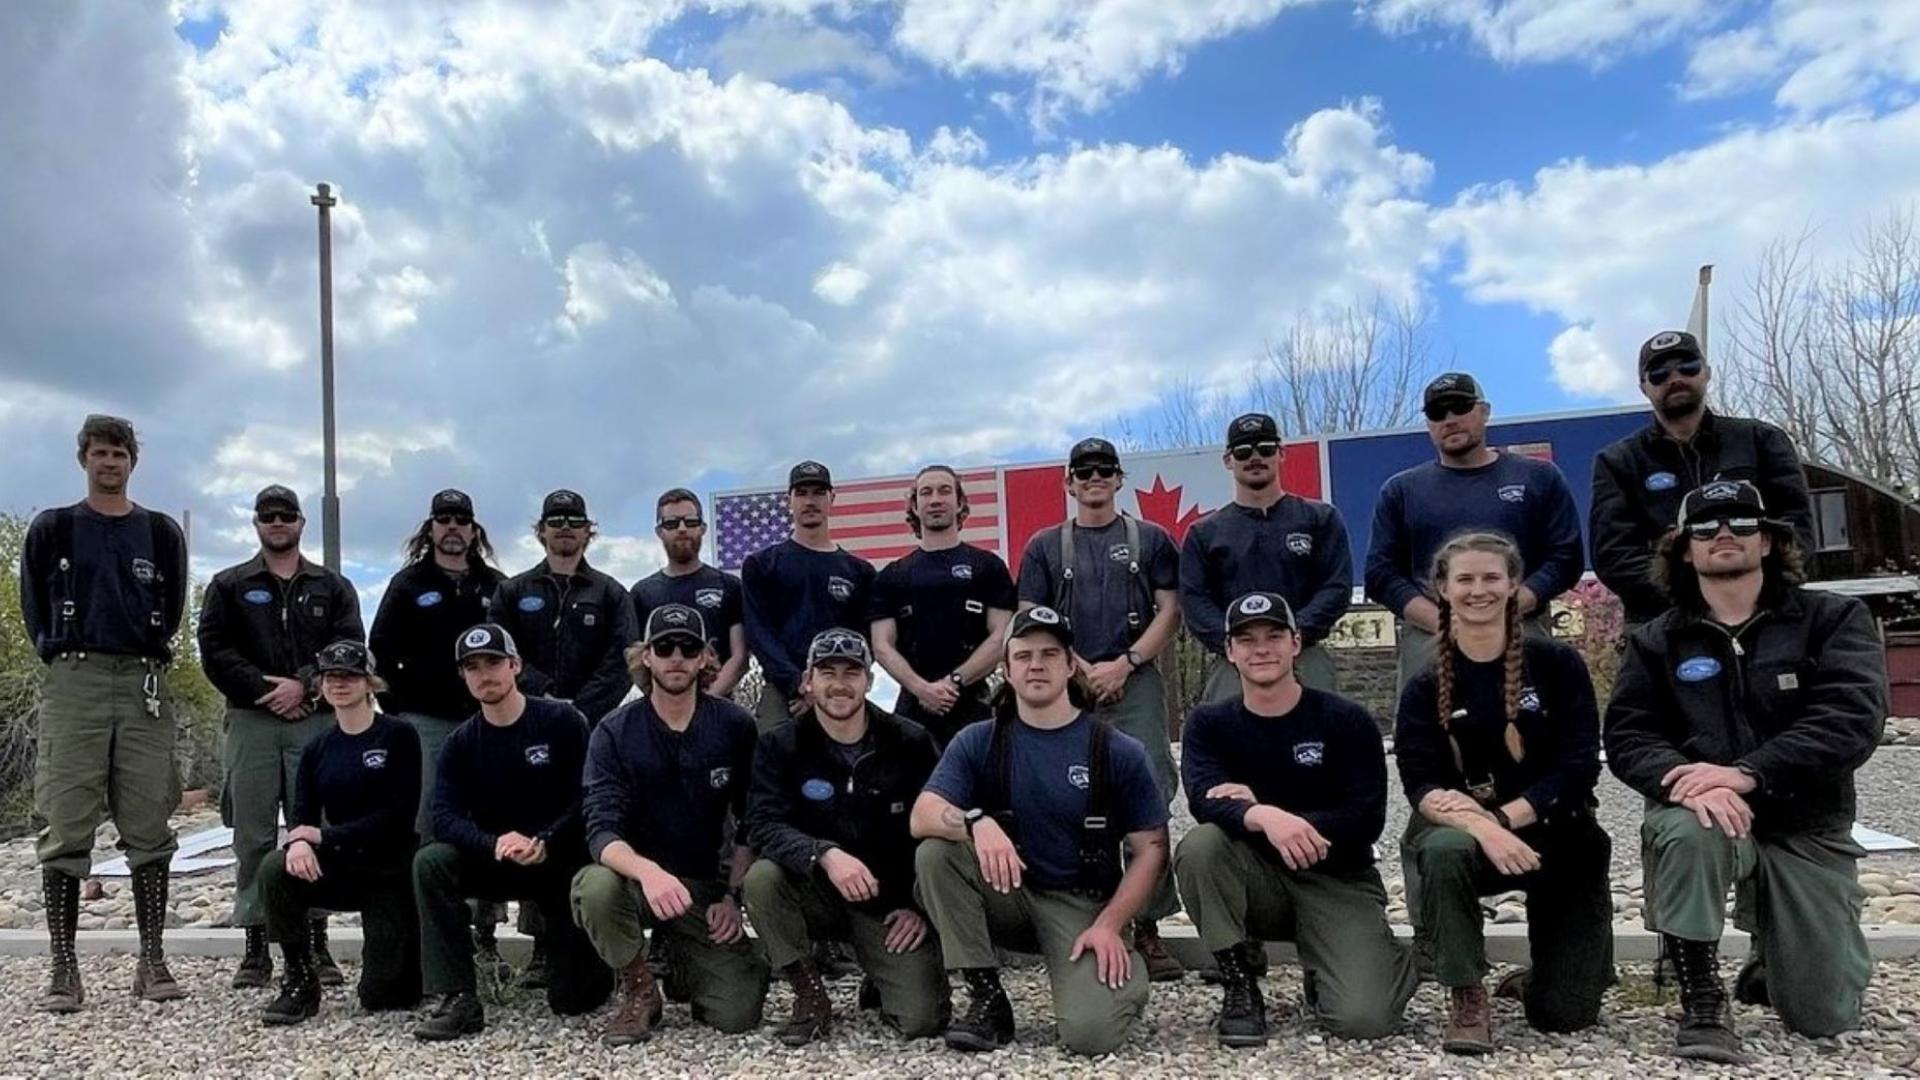 A National Park Service hotshot crew stands in a group before US and Canada flags.